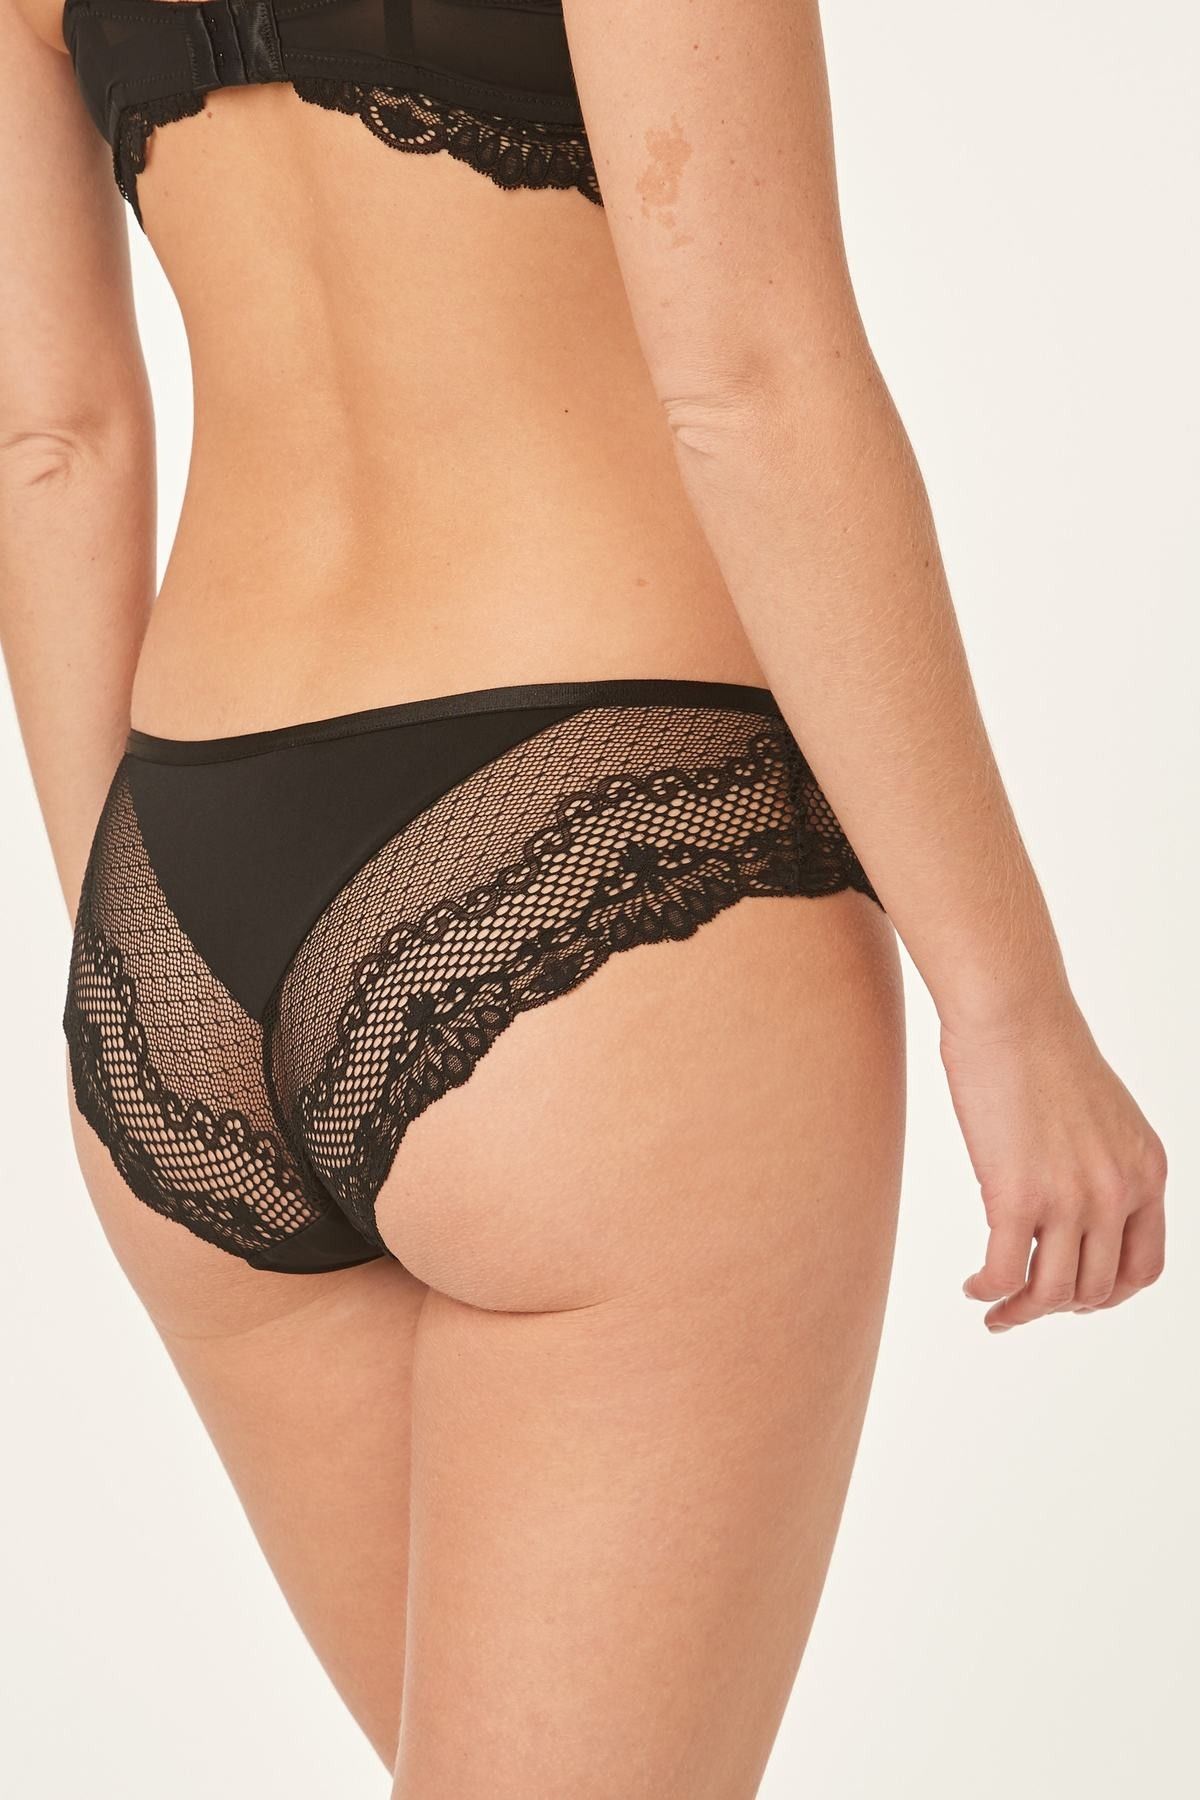 NEXT Microfibre And Lace Knickers Black Women Briefs